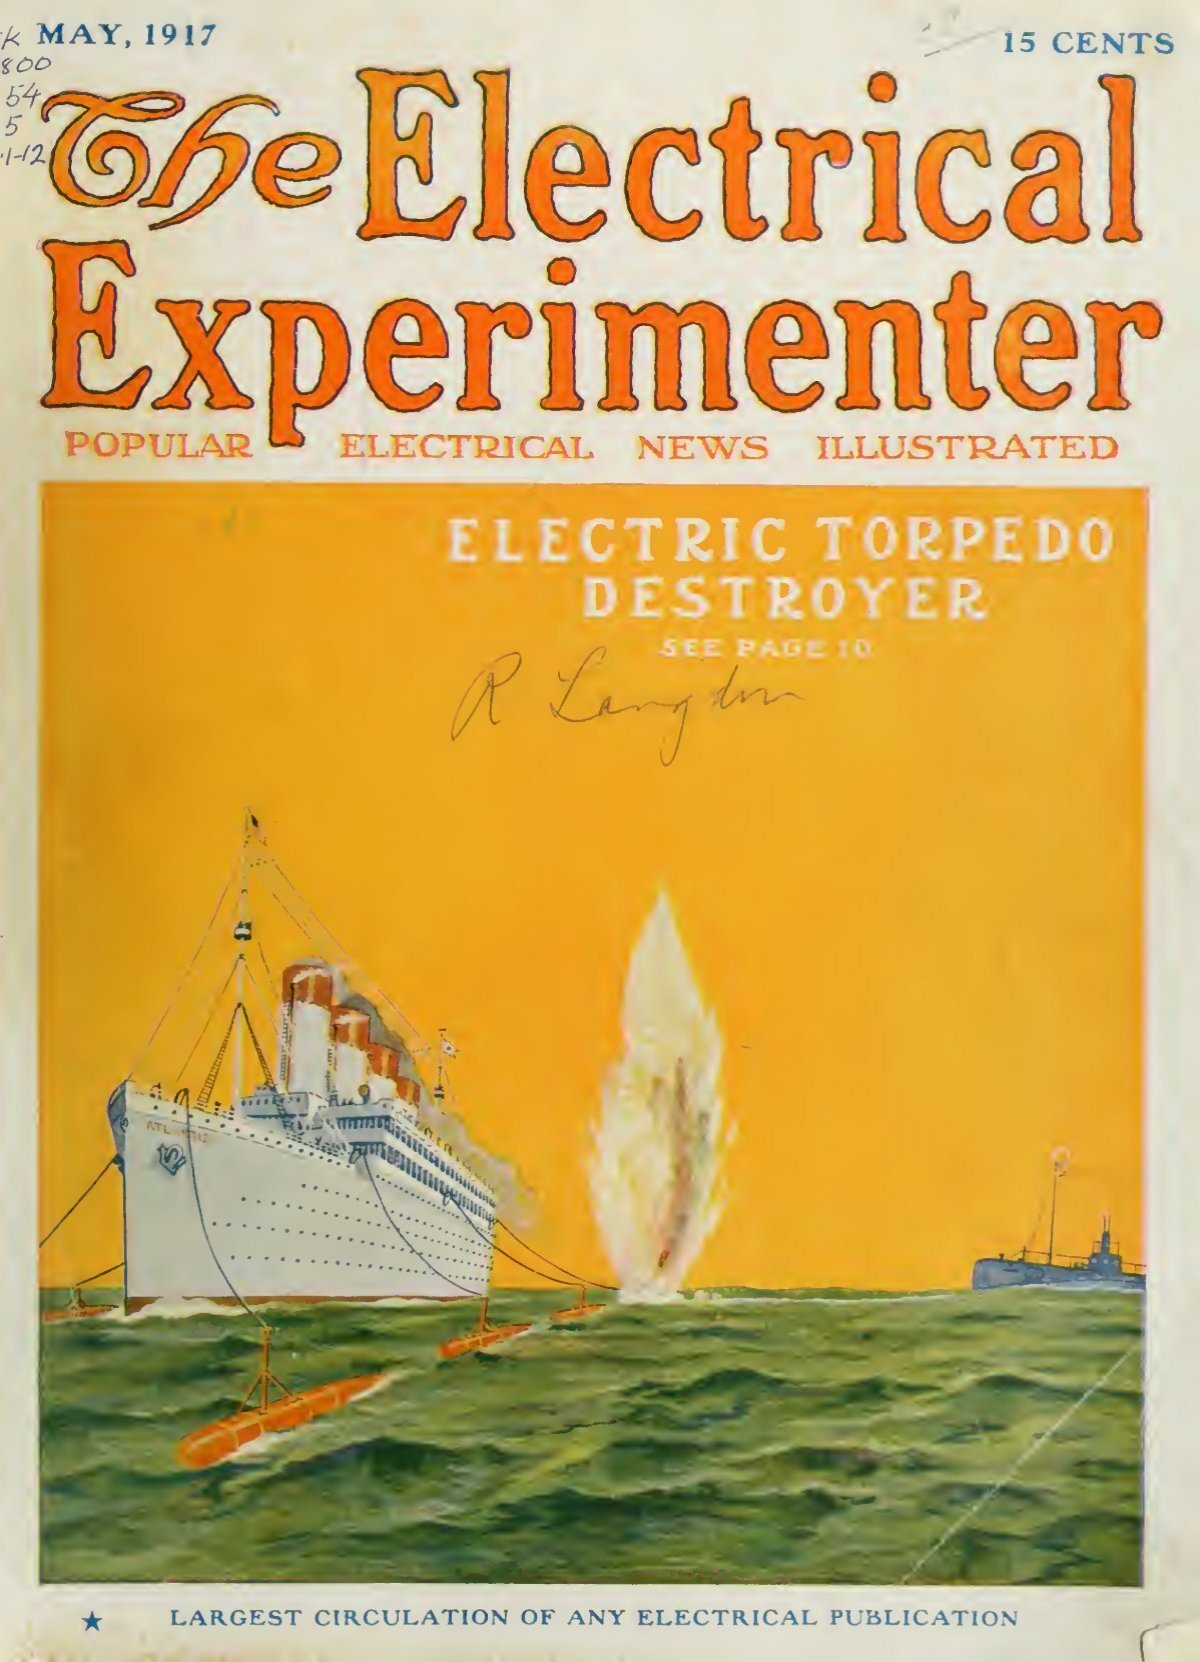 The Electrical experimenter